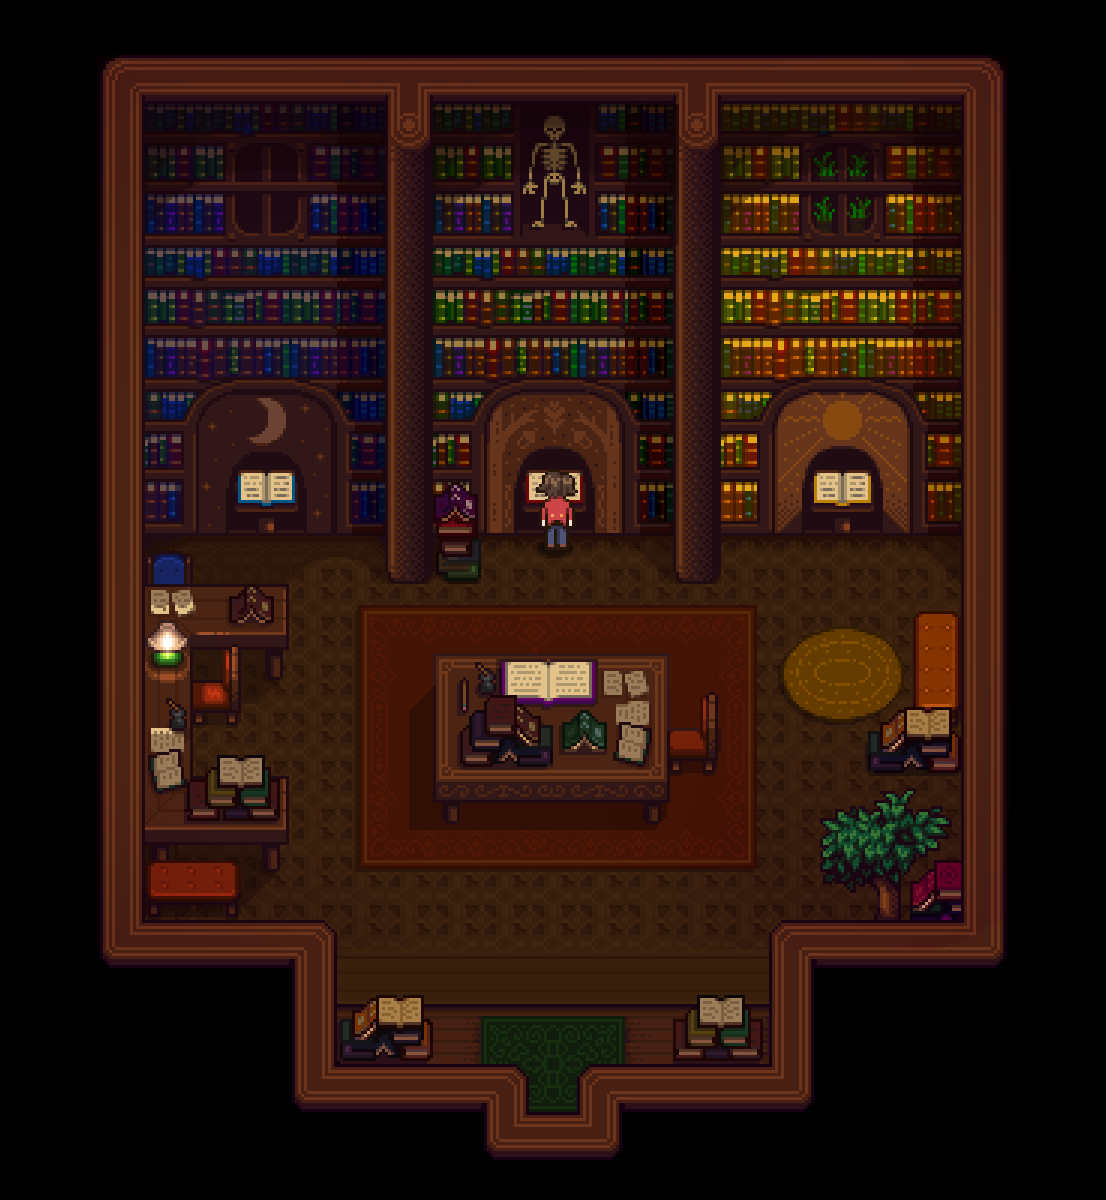 A screenshot from Haunted Chocolatier, showing a house and shop filled with plants.